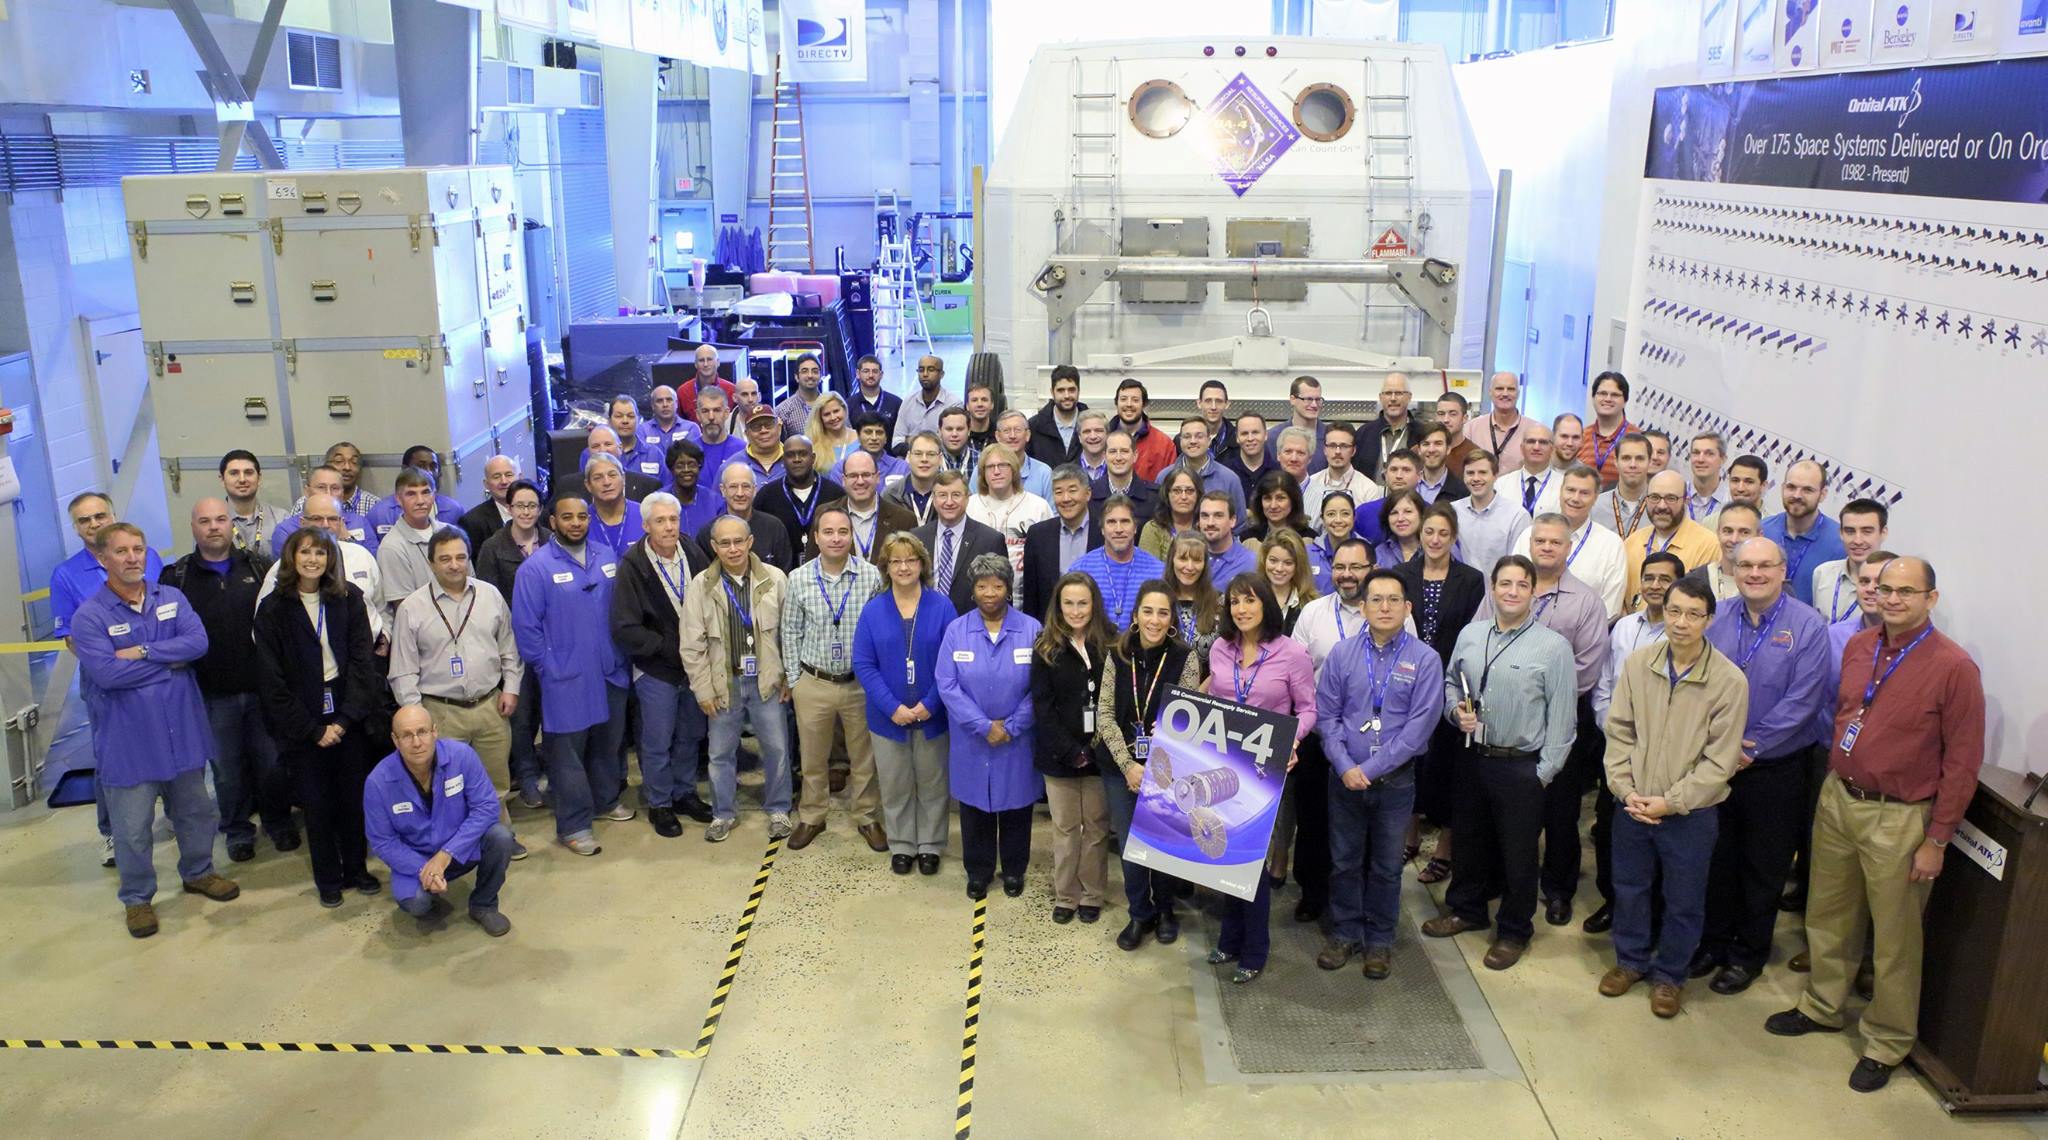 Orbital ATK employees celebrate the delivery of OA-4's prime components to KSC. Photo Credit: Orbital ATK